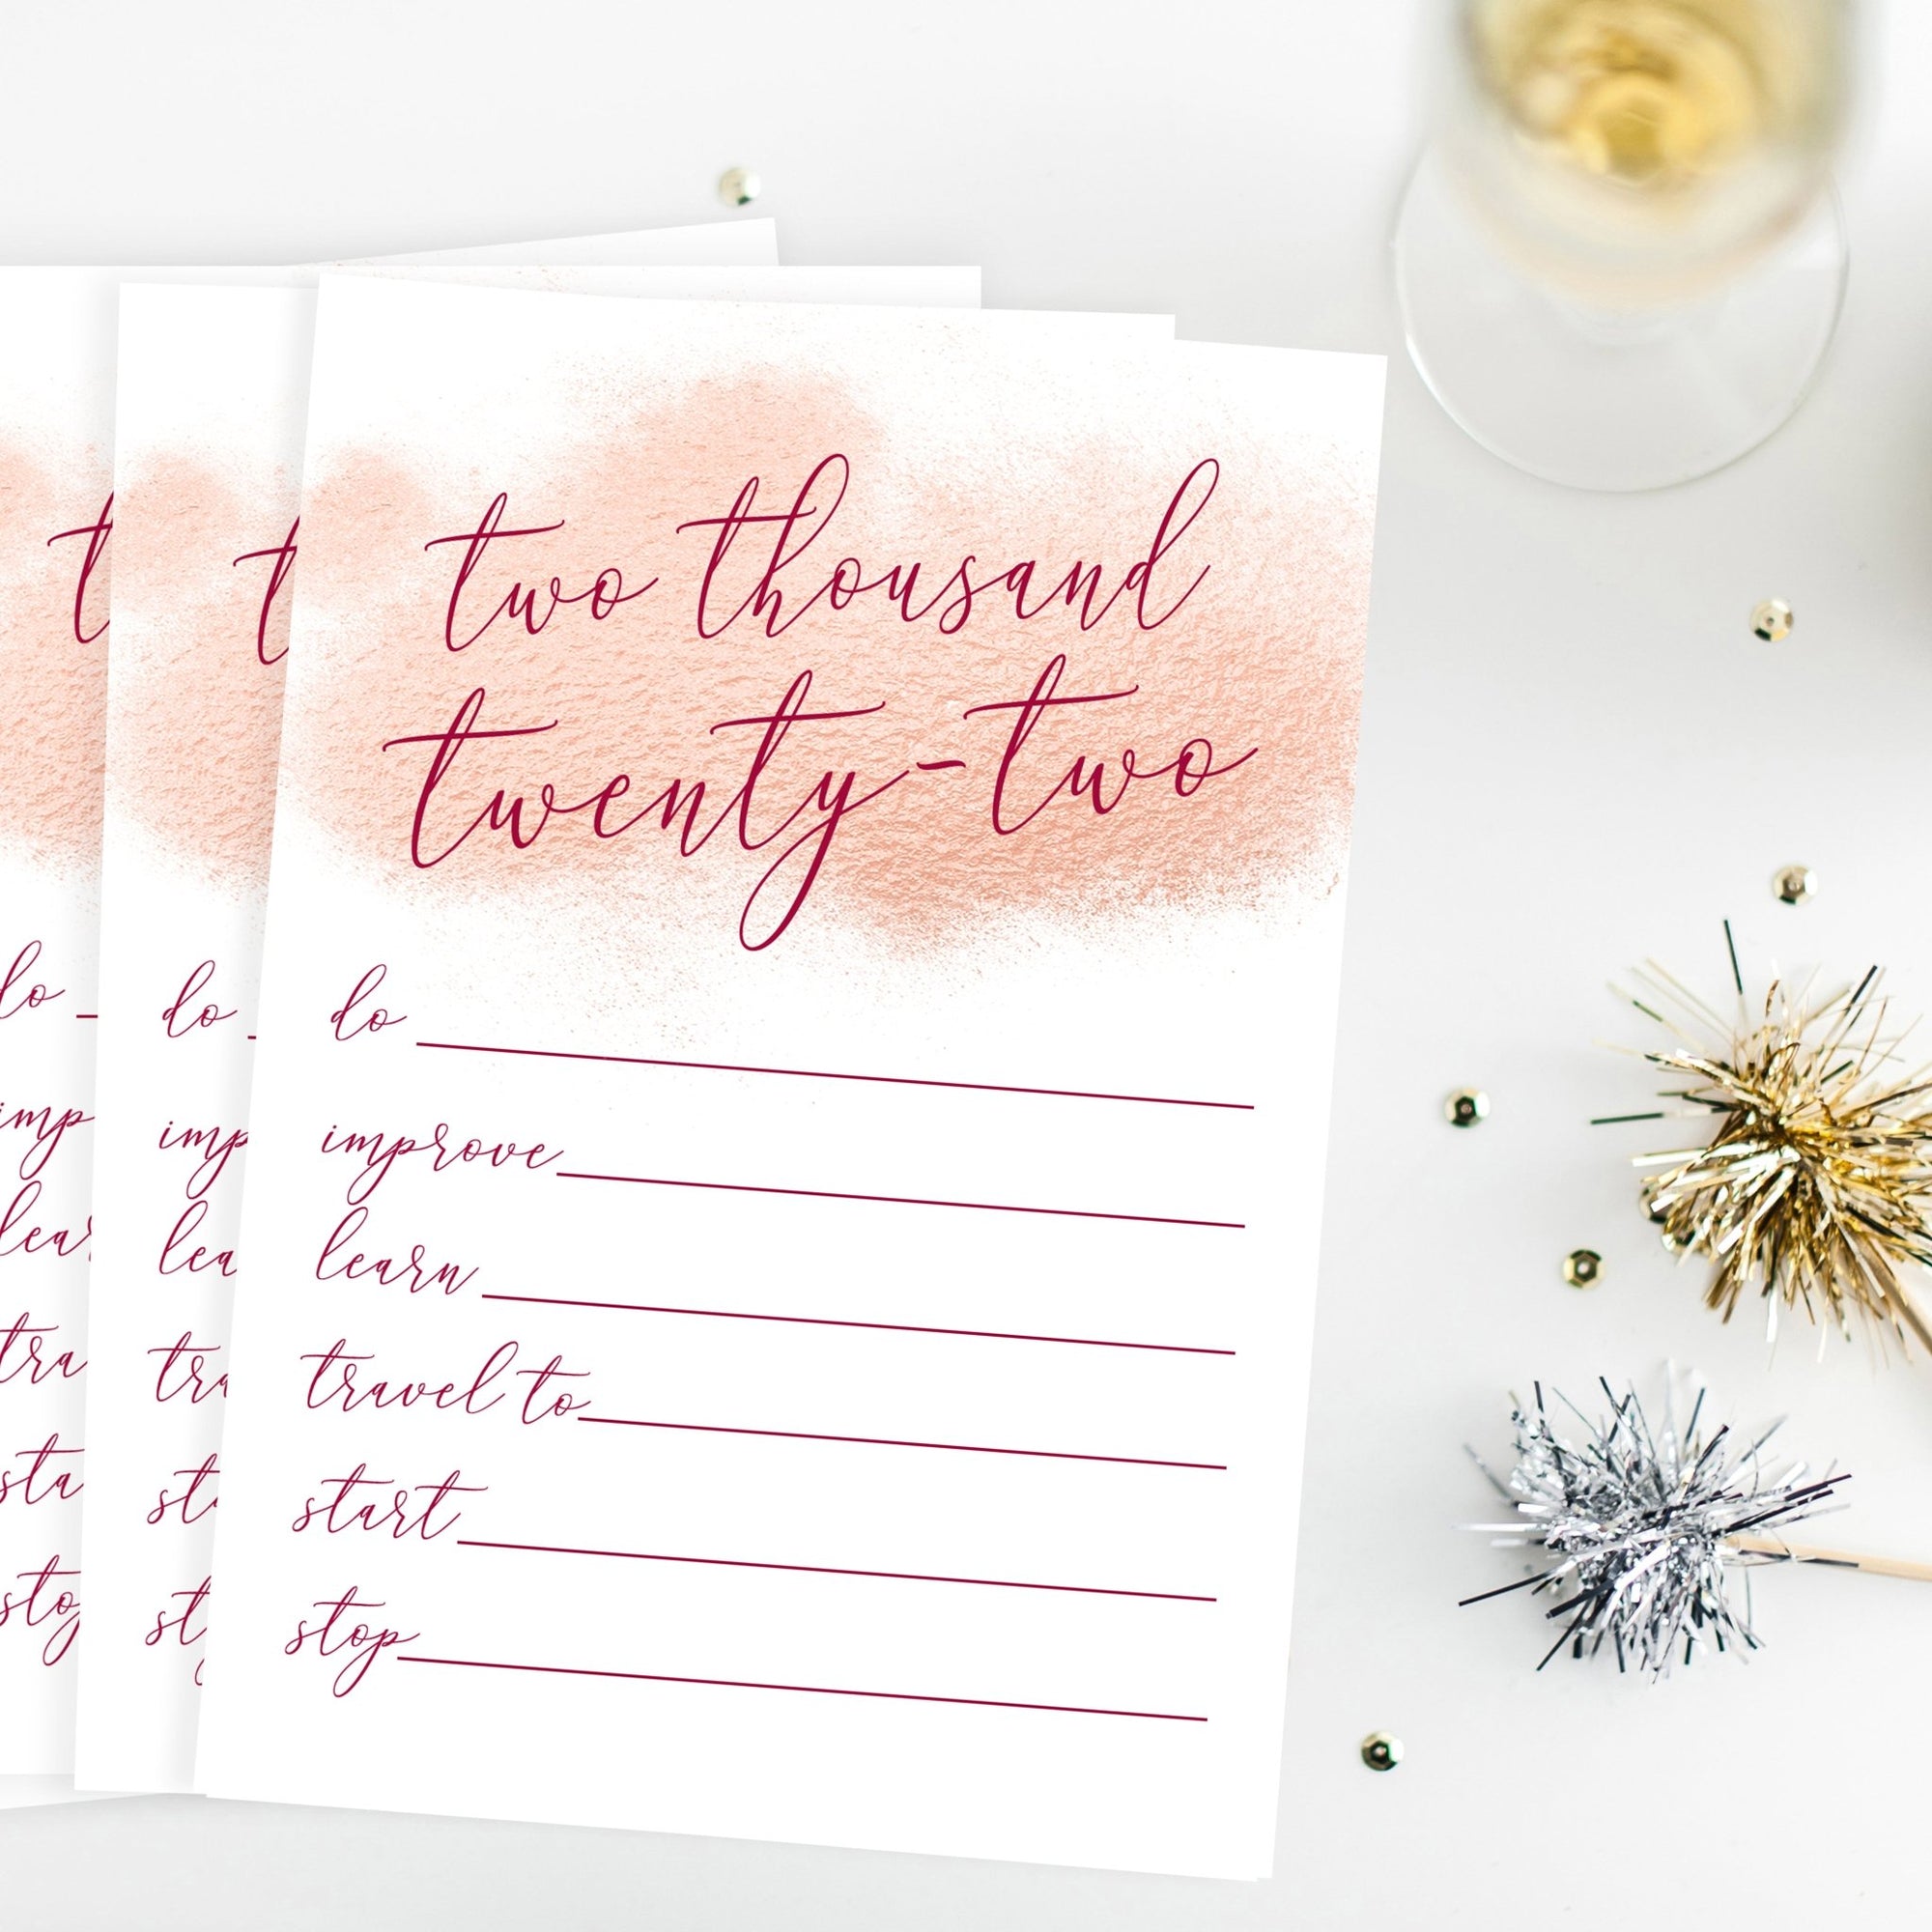 2022 New Year's Resolution Cards - FREE Printable - Pretty Collected